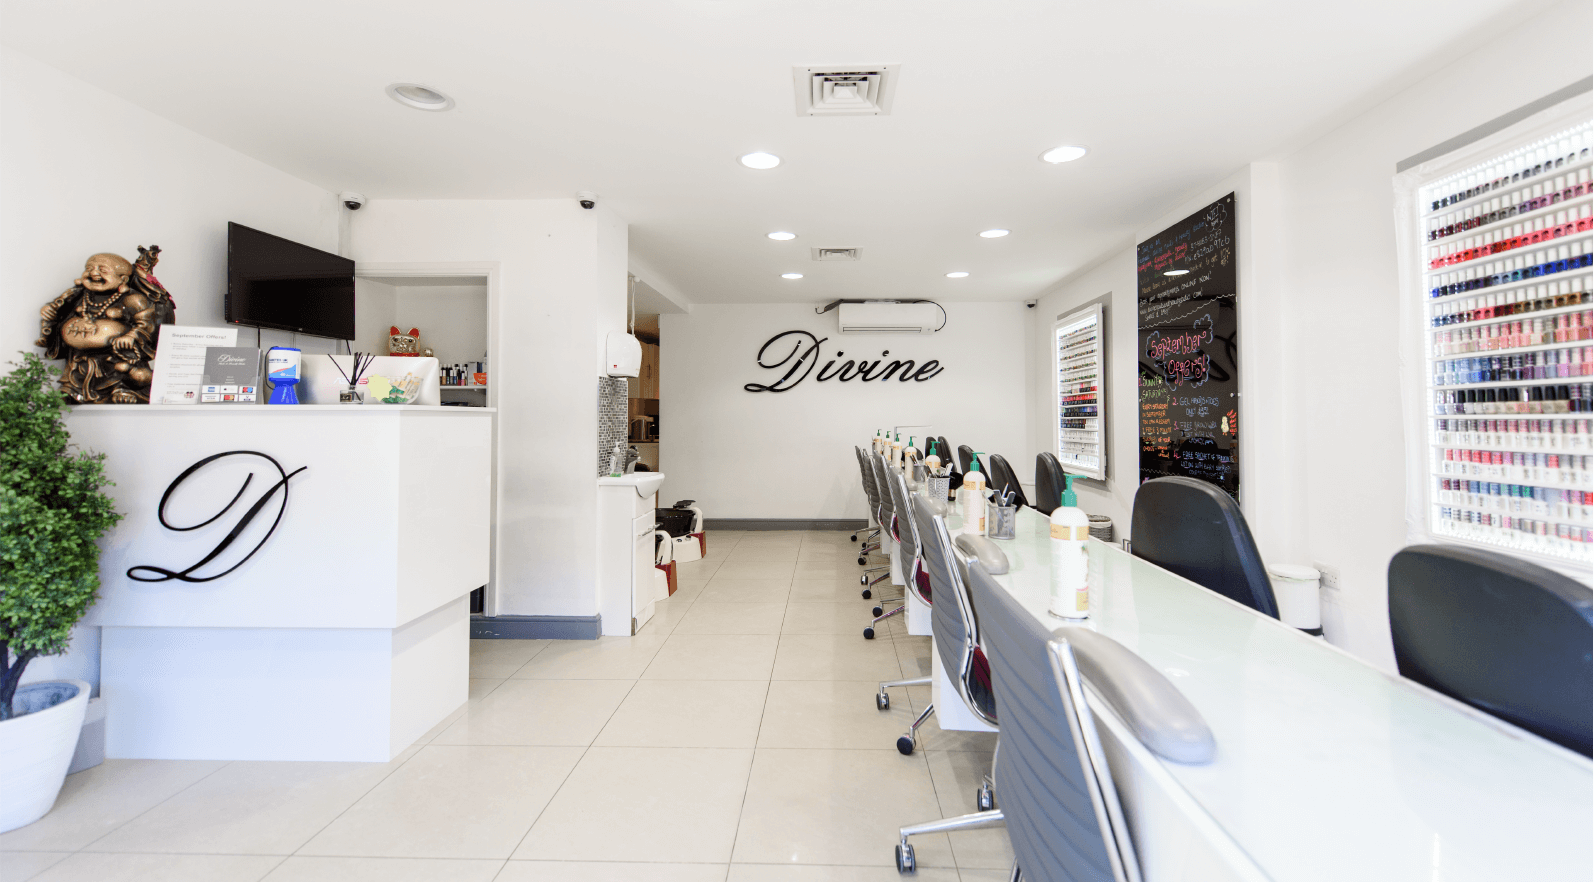 Relax, renew and re-energize at D'vine Nail Spa & Studio – Just Rumana